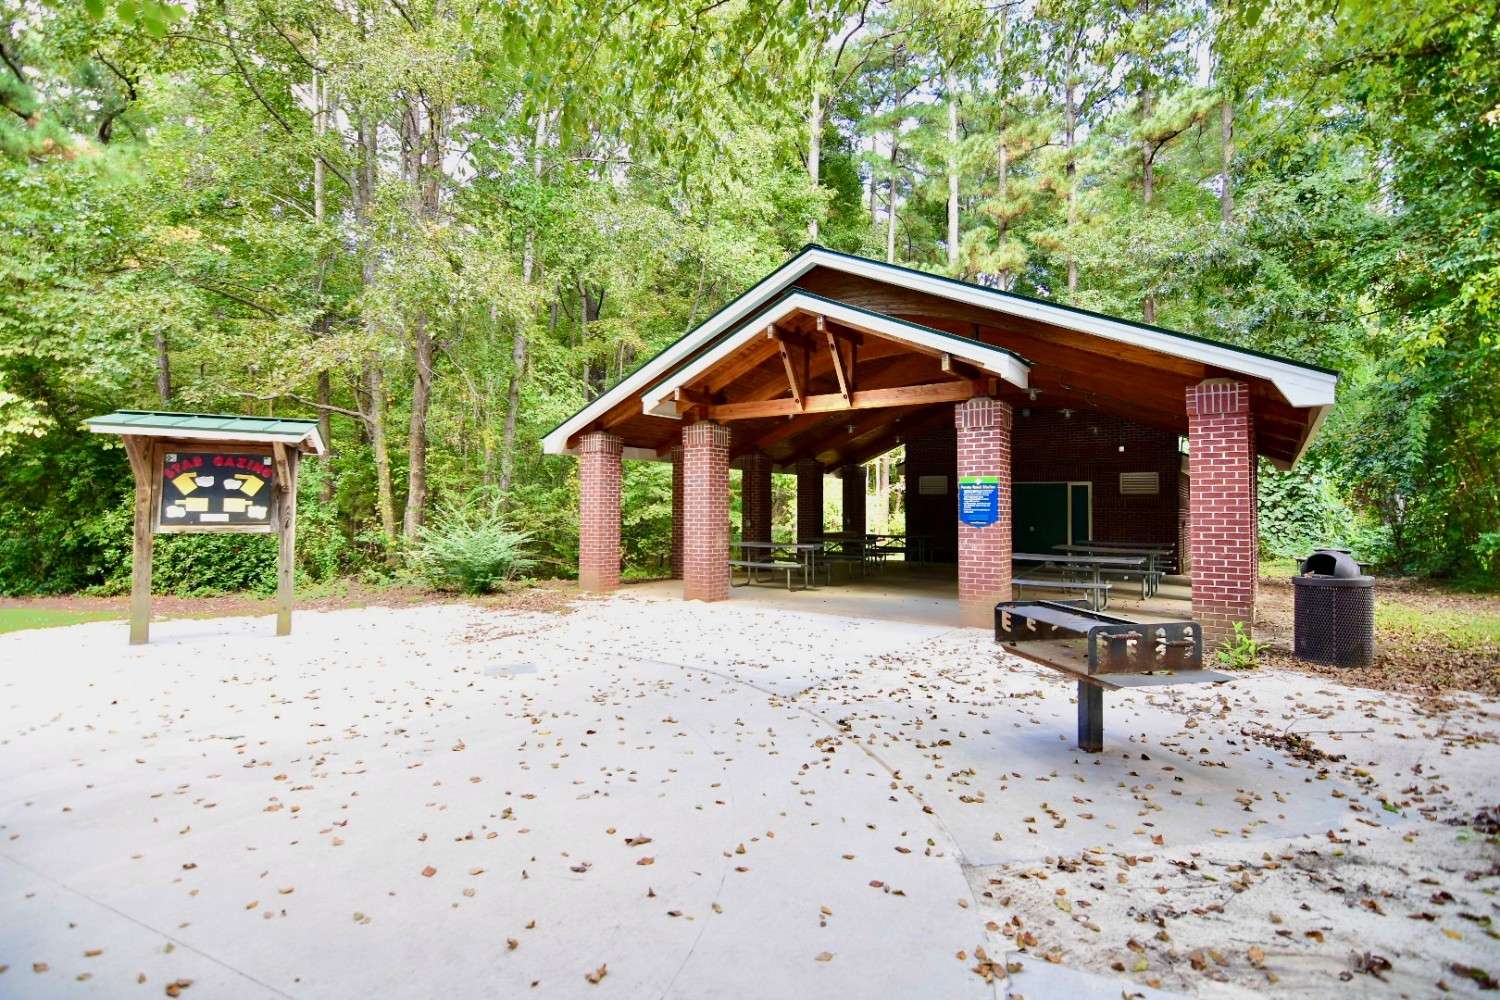 Penny Road Picnic Shelter